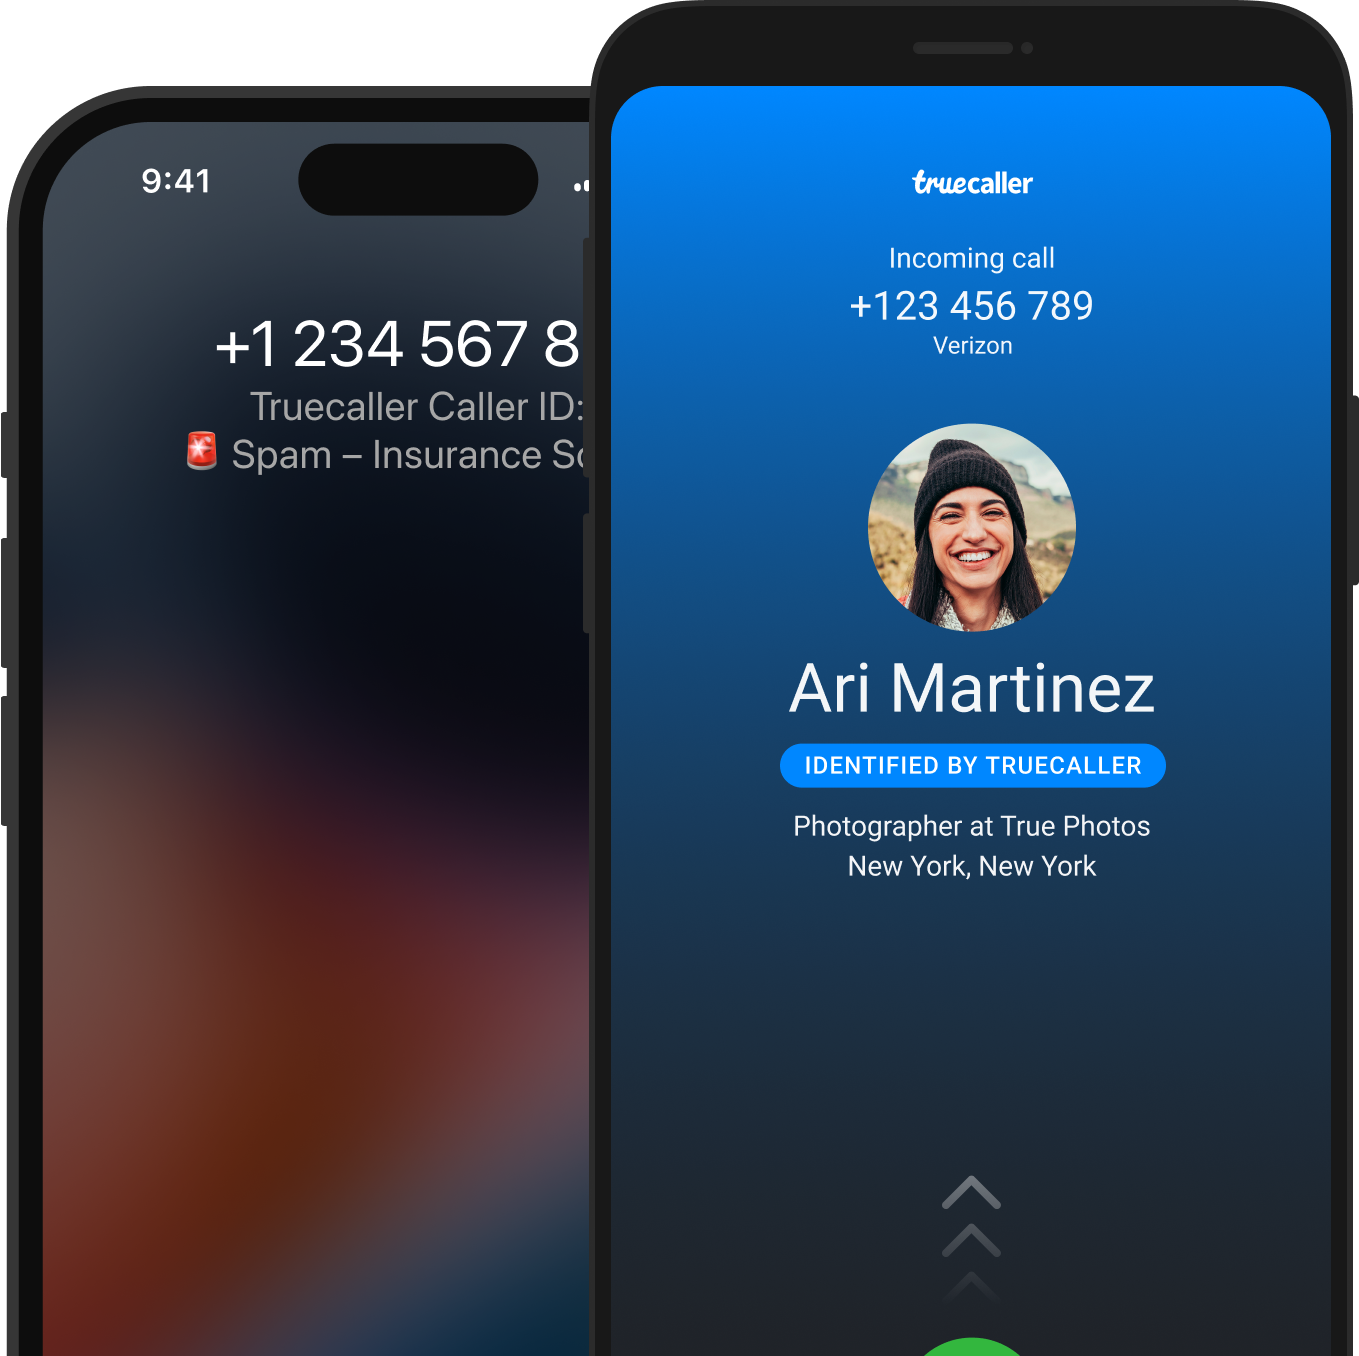 two screens - one for android and one for iOS, showing truecaller identifying an incoming phone call